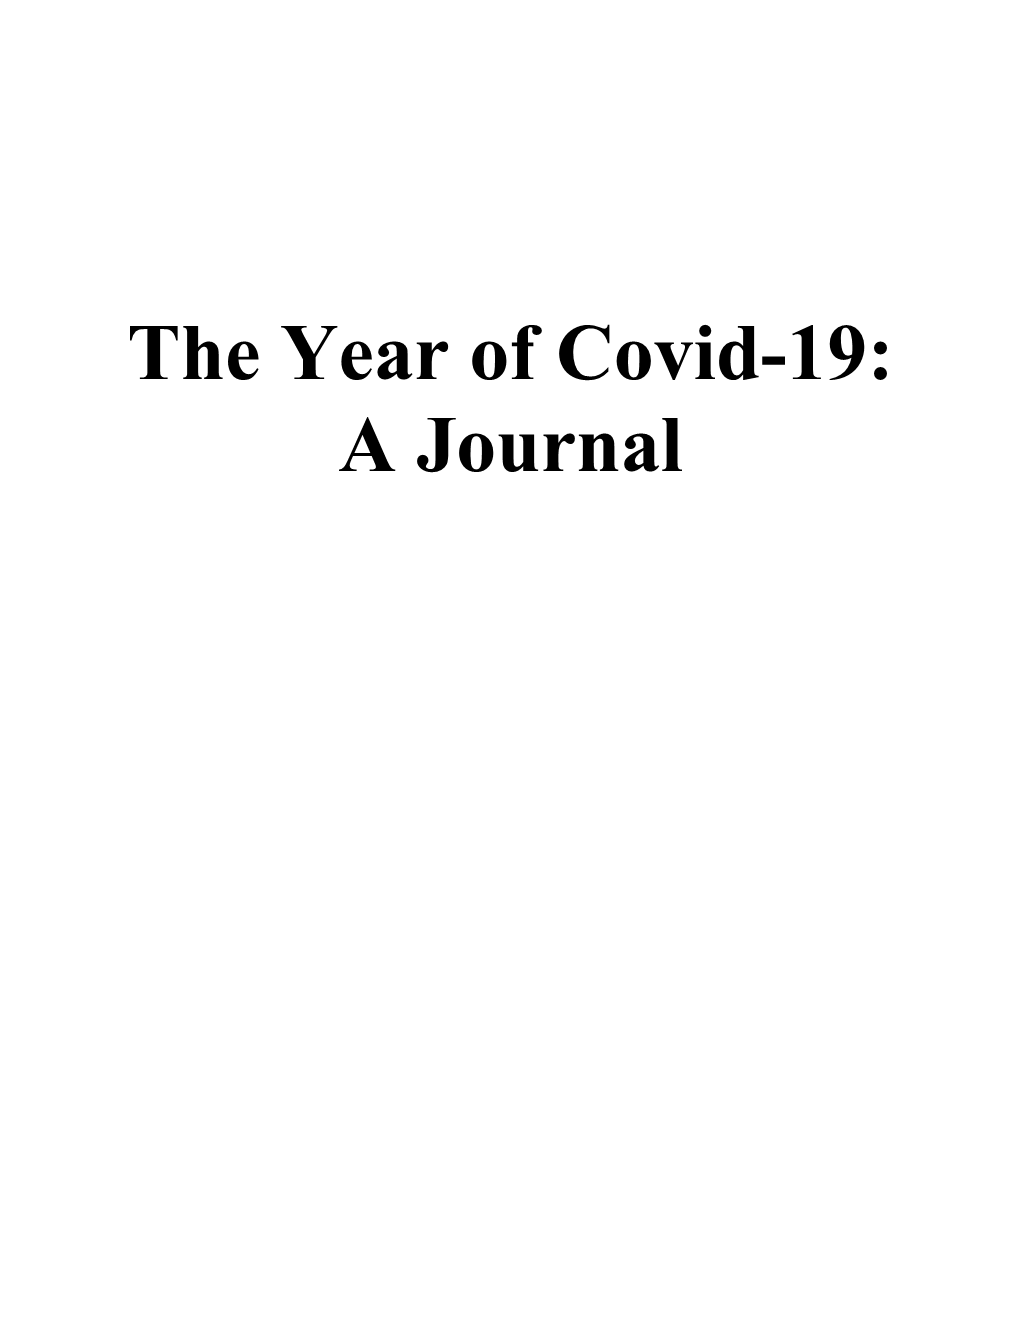 The Year of Covid-19: a Journal